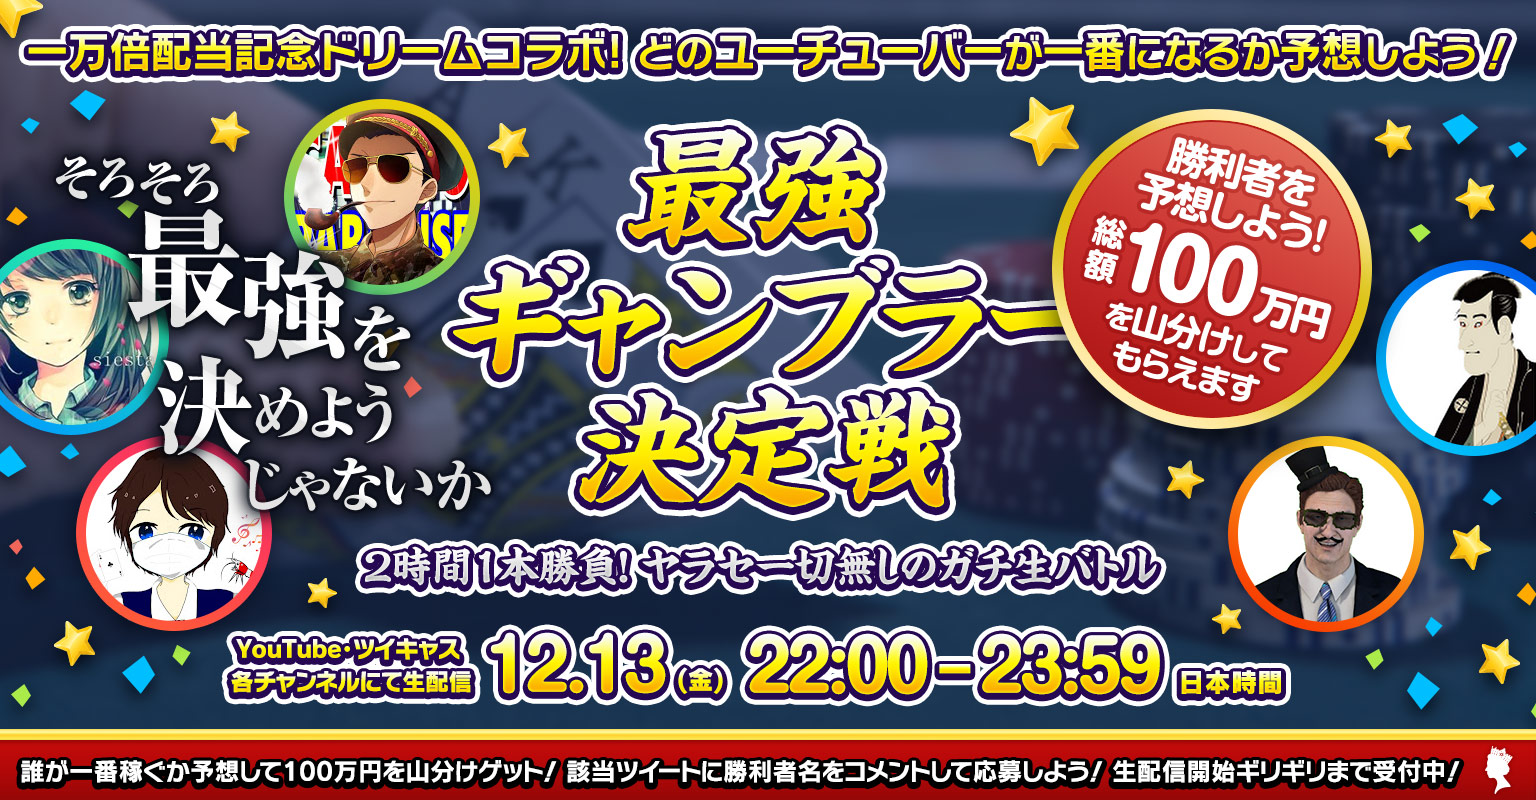 Amazing 10,000 times dividend commemorative dream collaboration of the strongest gamblers. It will be live-streamed on Friday, December 13, 2019. Don't miss it